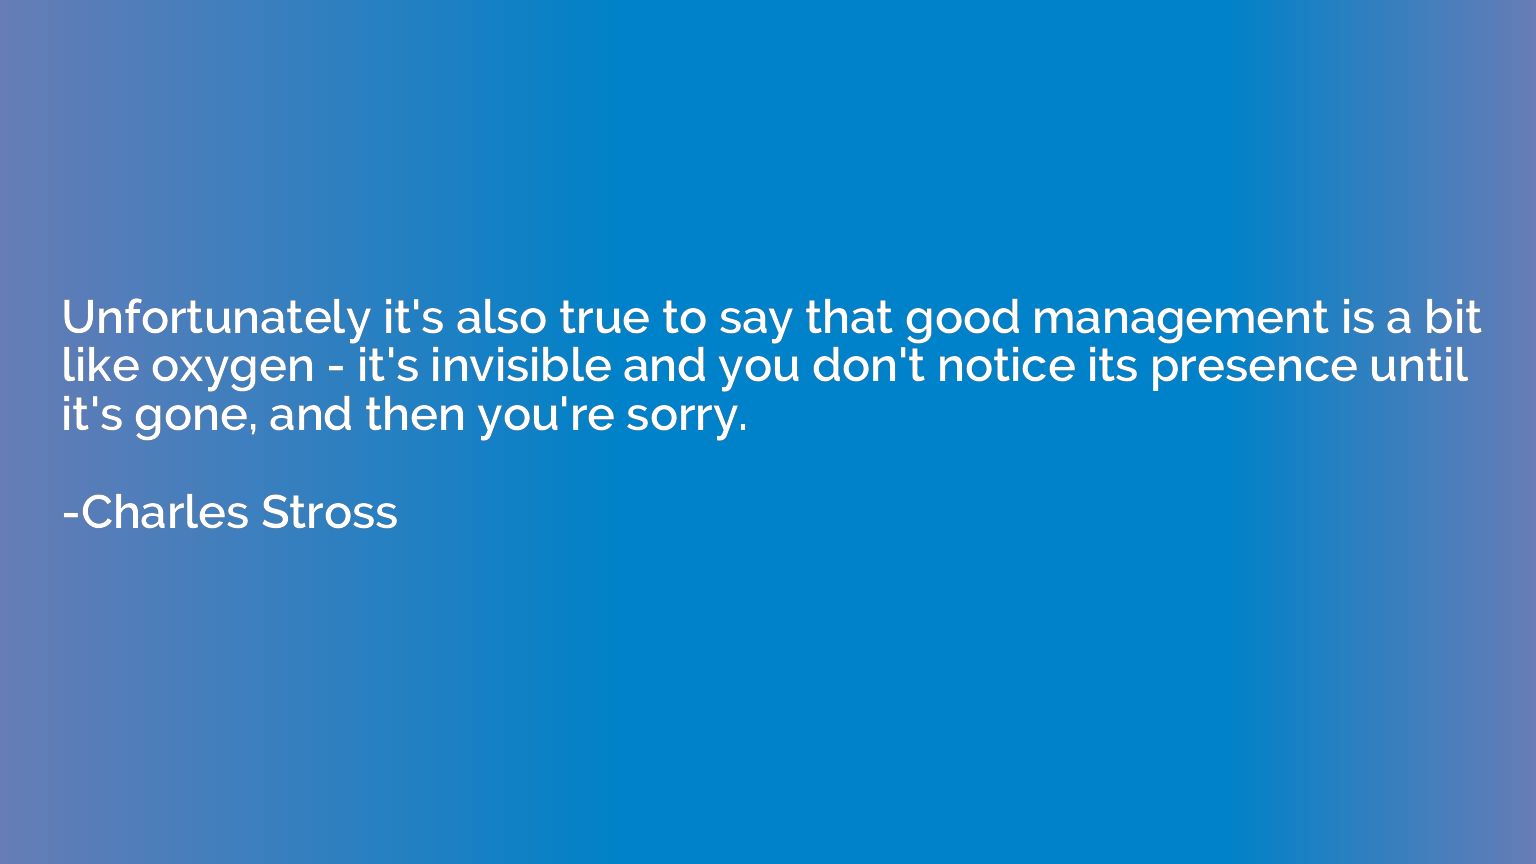 Unfortunately it's also true to say that good management is 